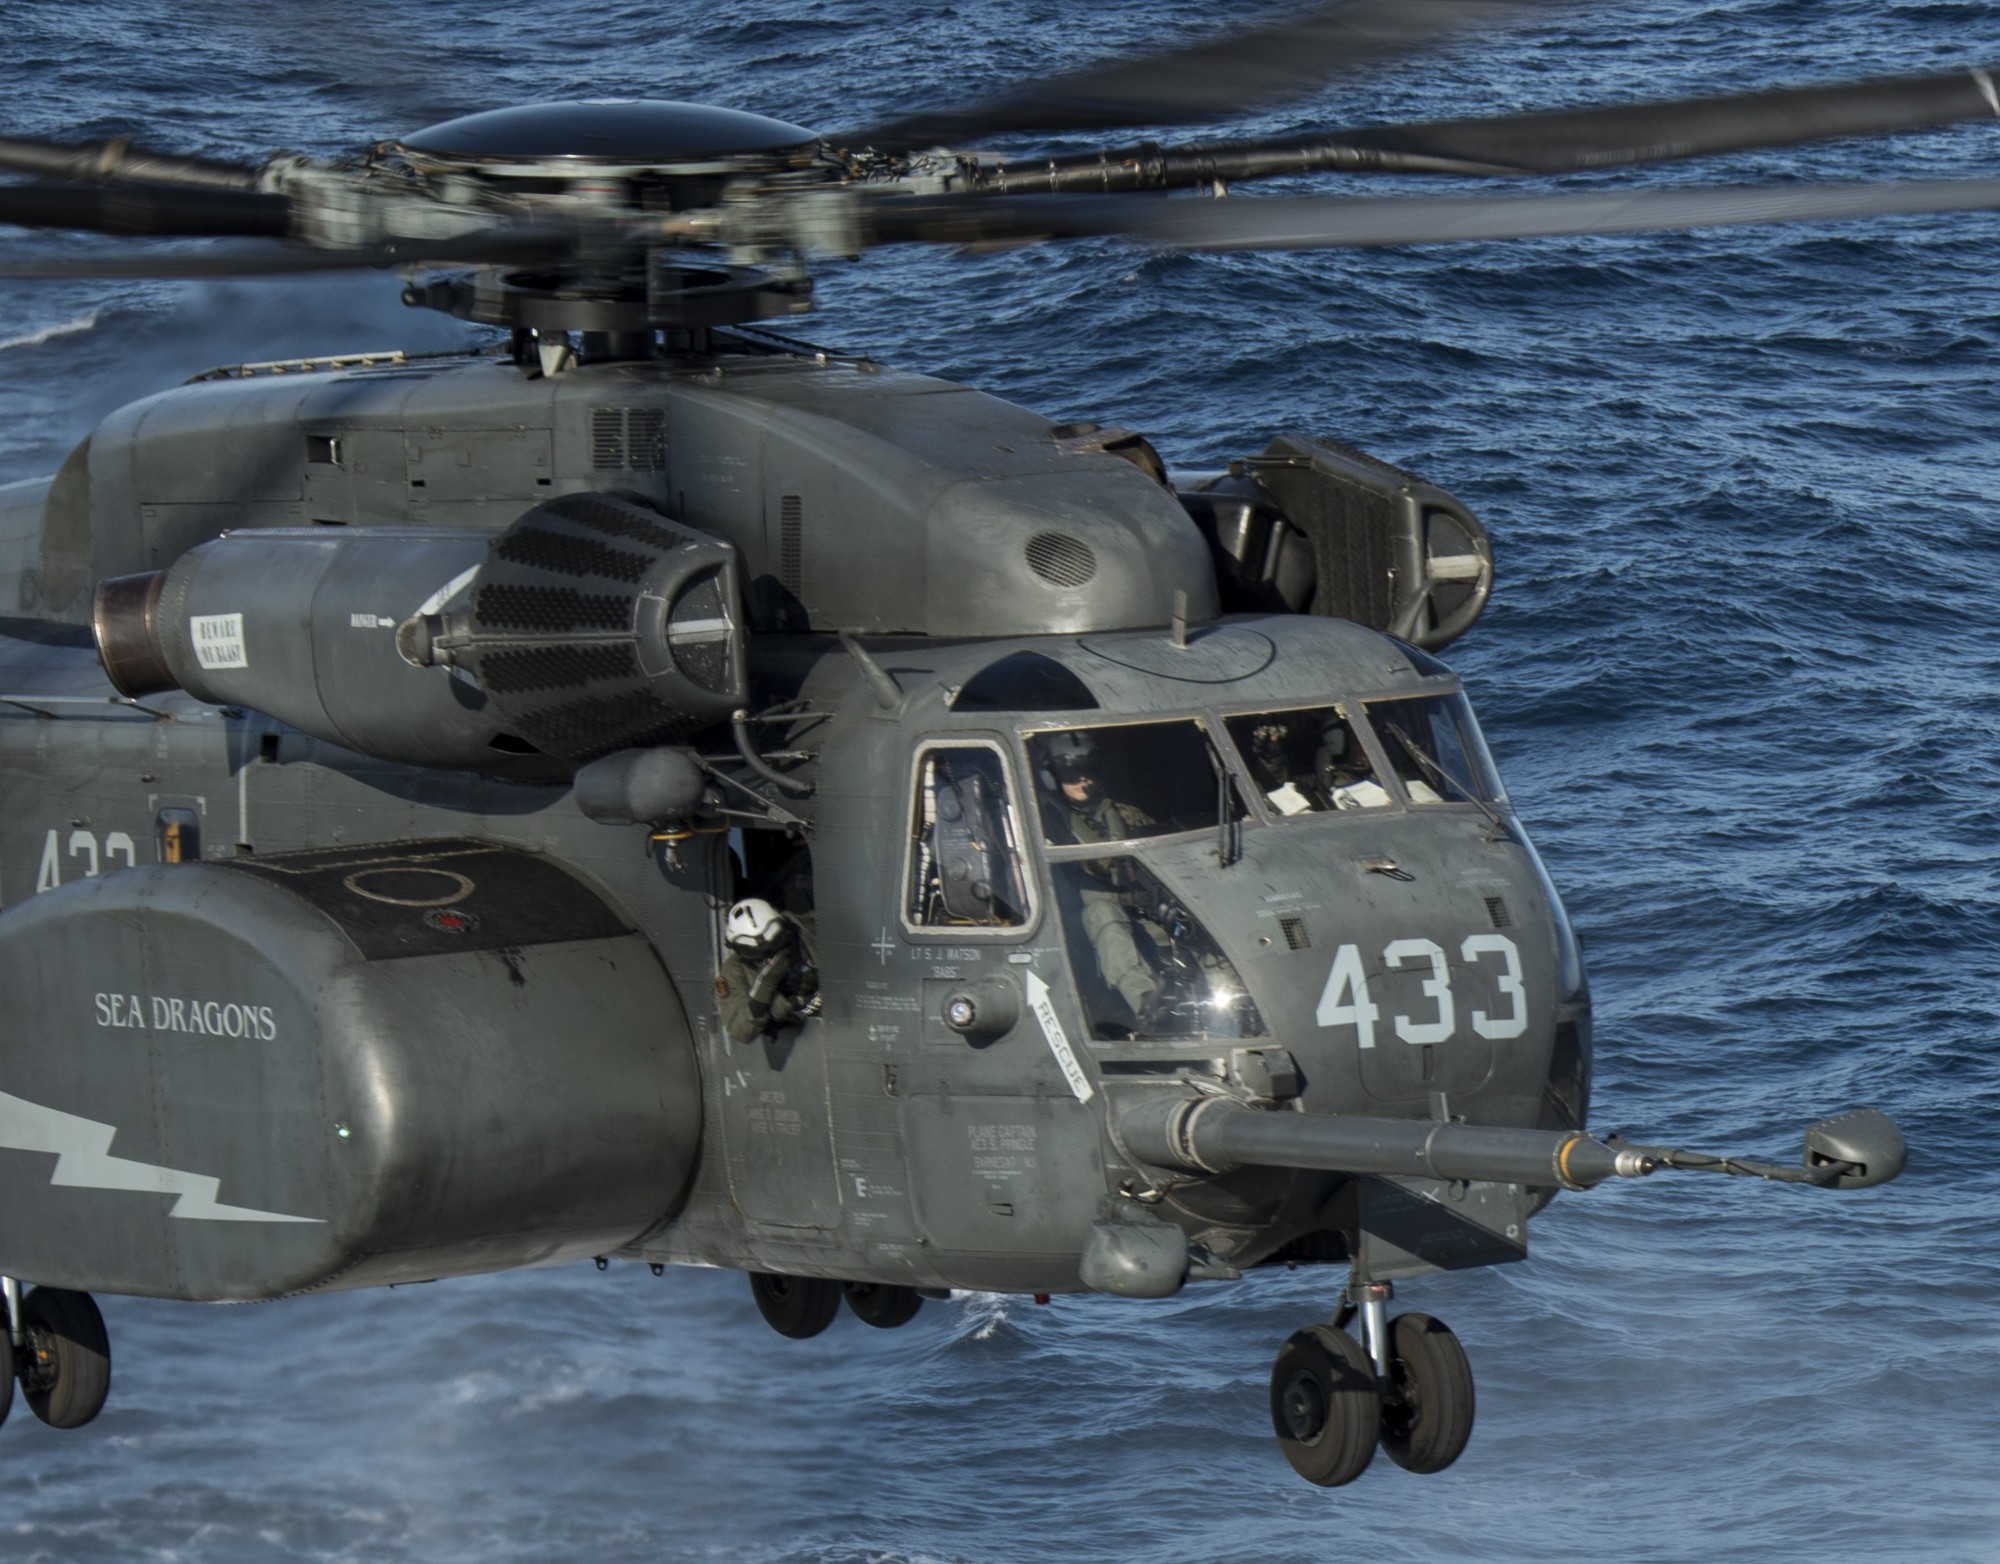 hm-12 sea dragons helicopter mine countermeasures squadron navy mh-53d sea dragon 23